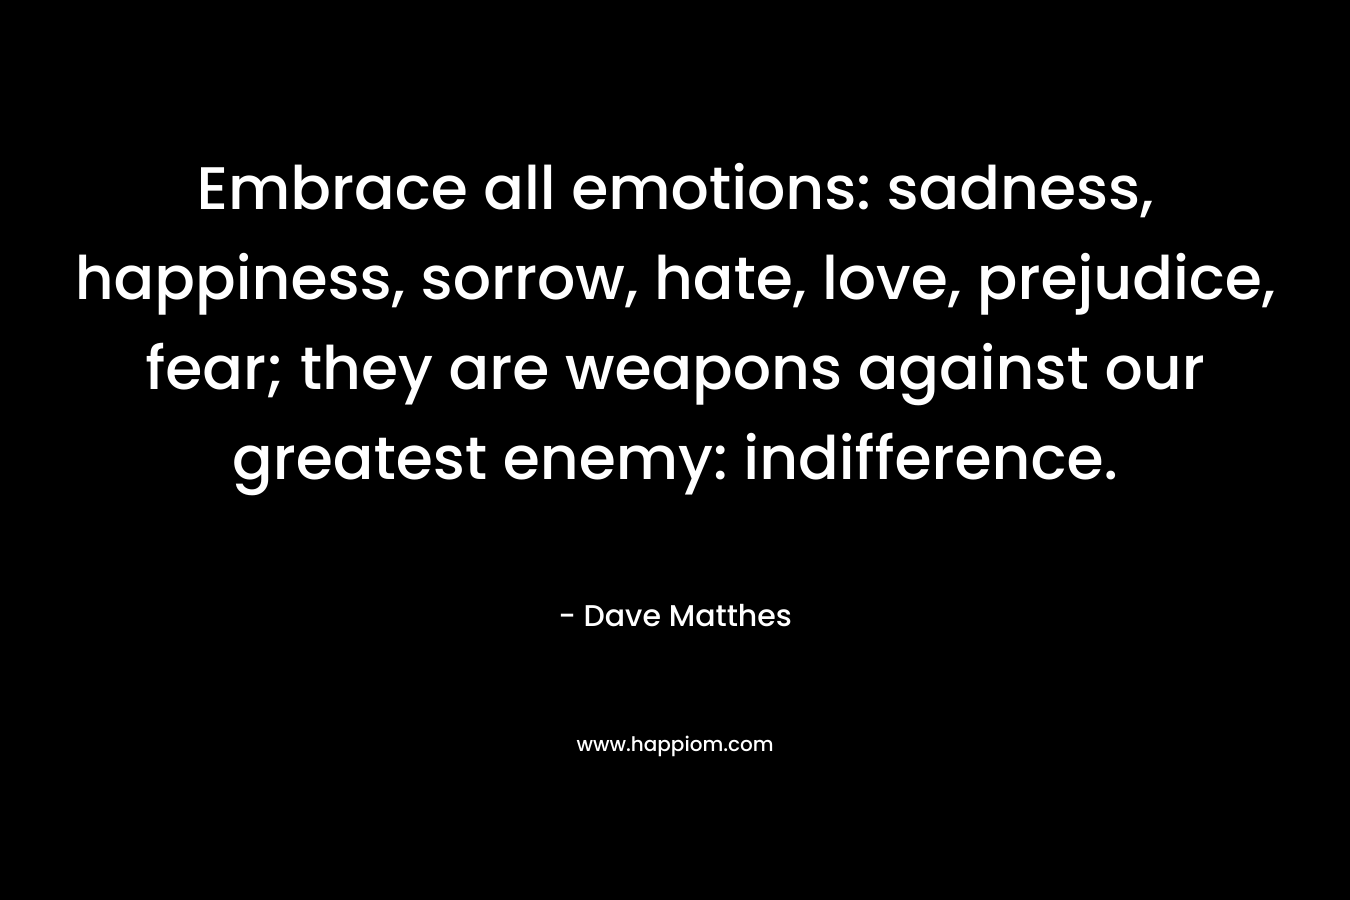 Embrace all emotions: sadness, happiness, sorrow, hate, love, prejudice, fear; they are weapons against our greatest enemy: indifference.